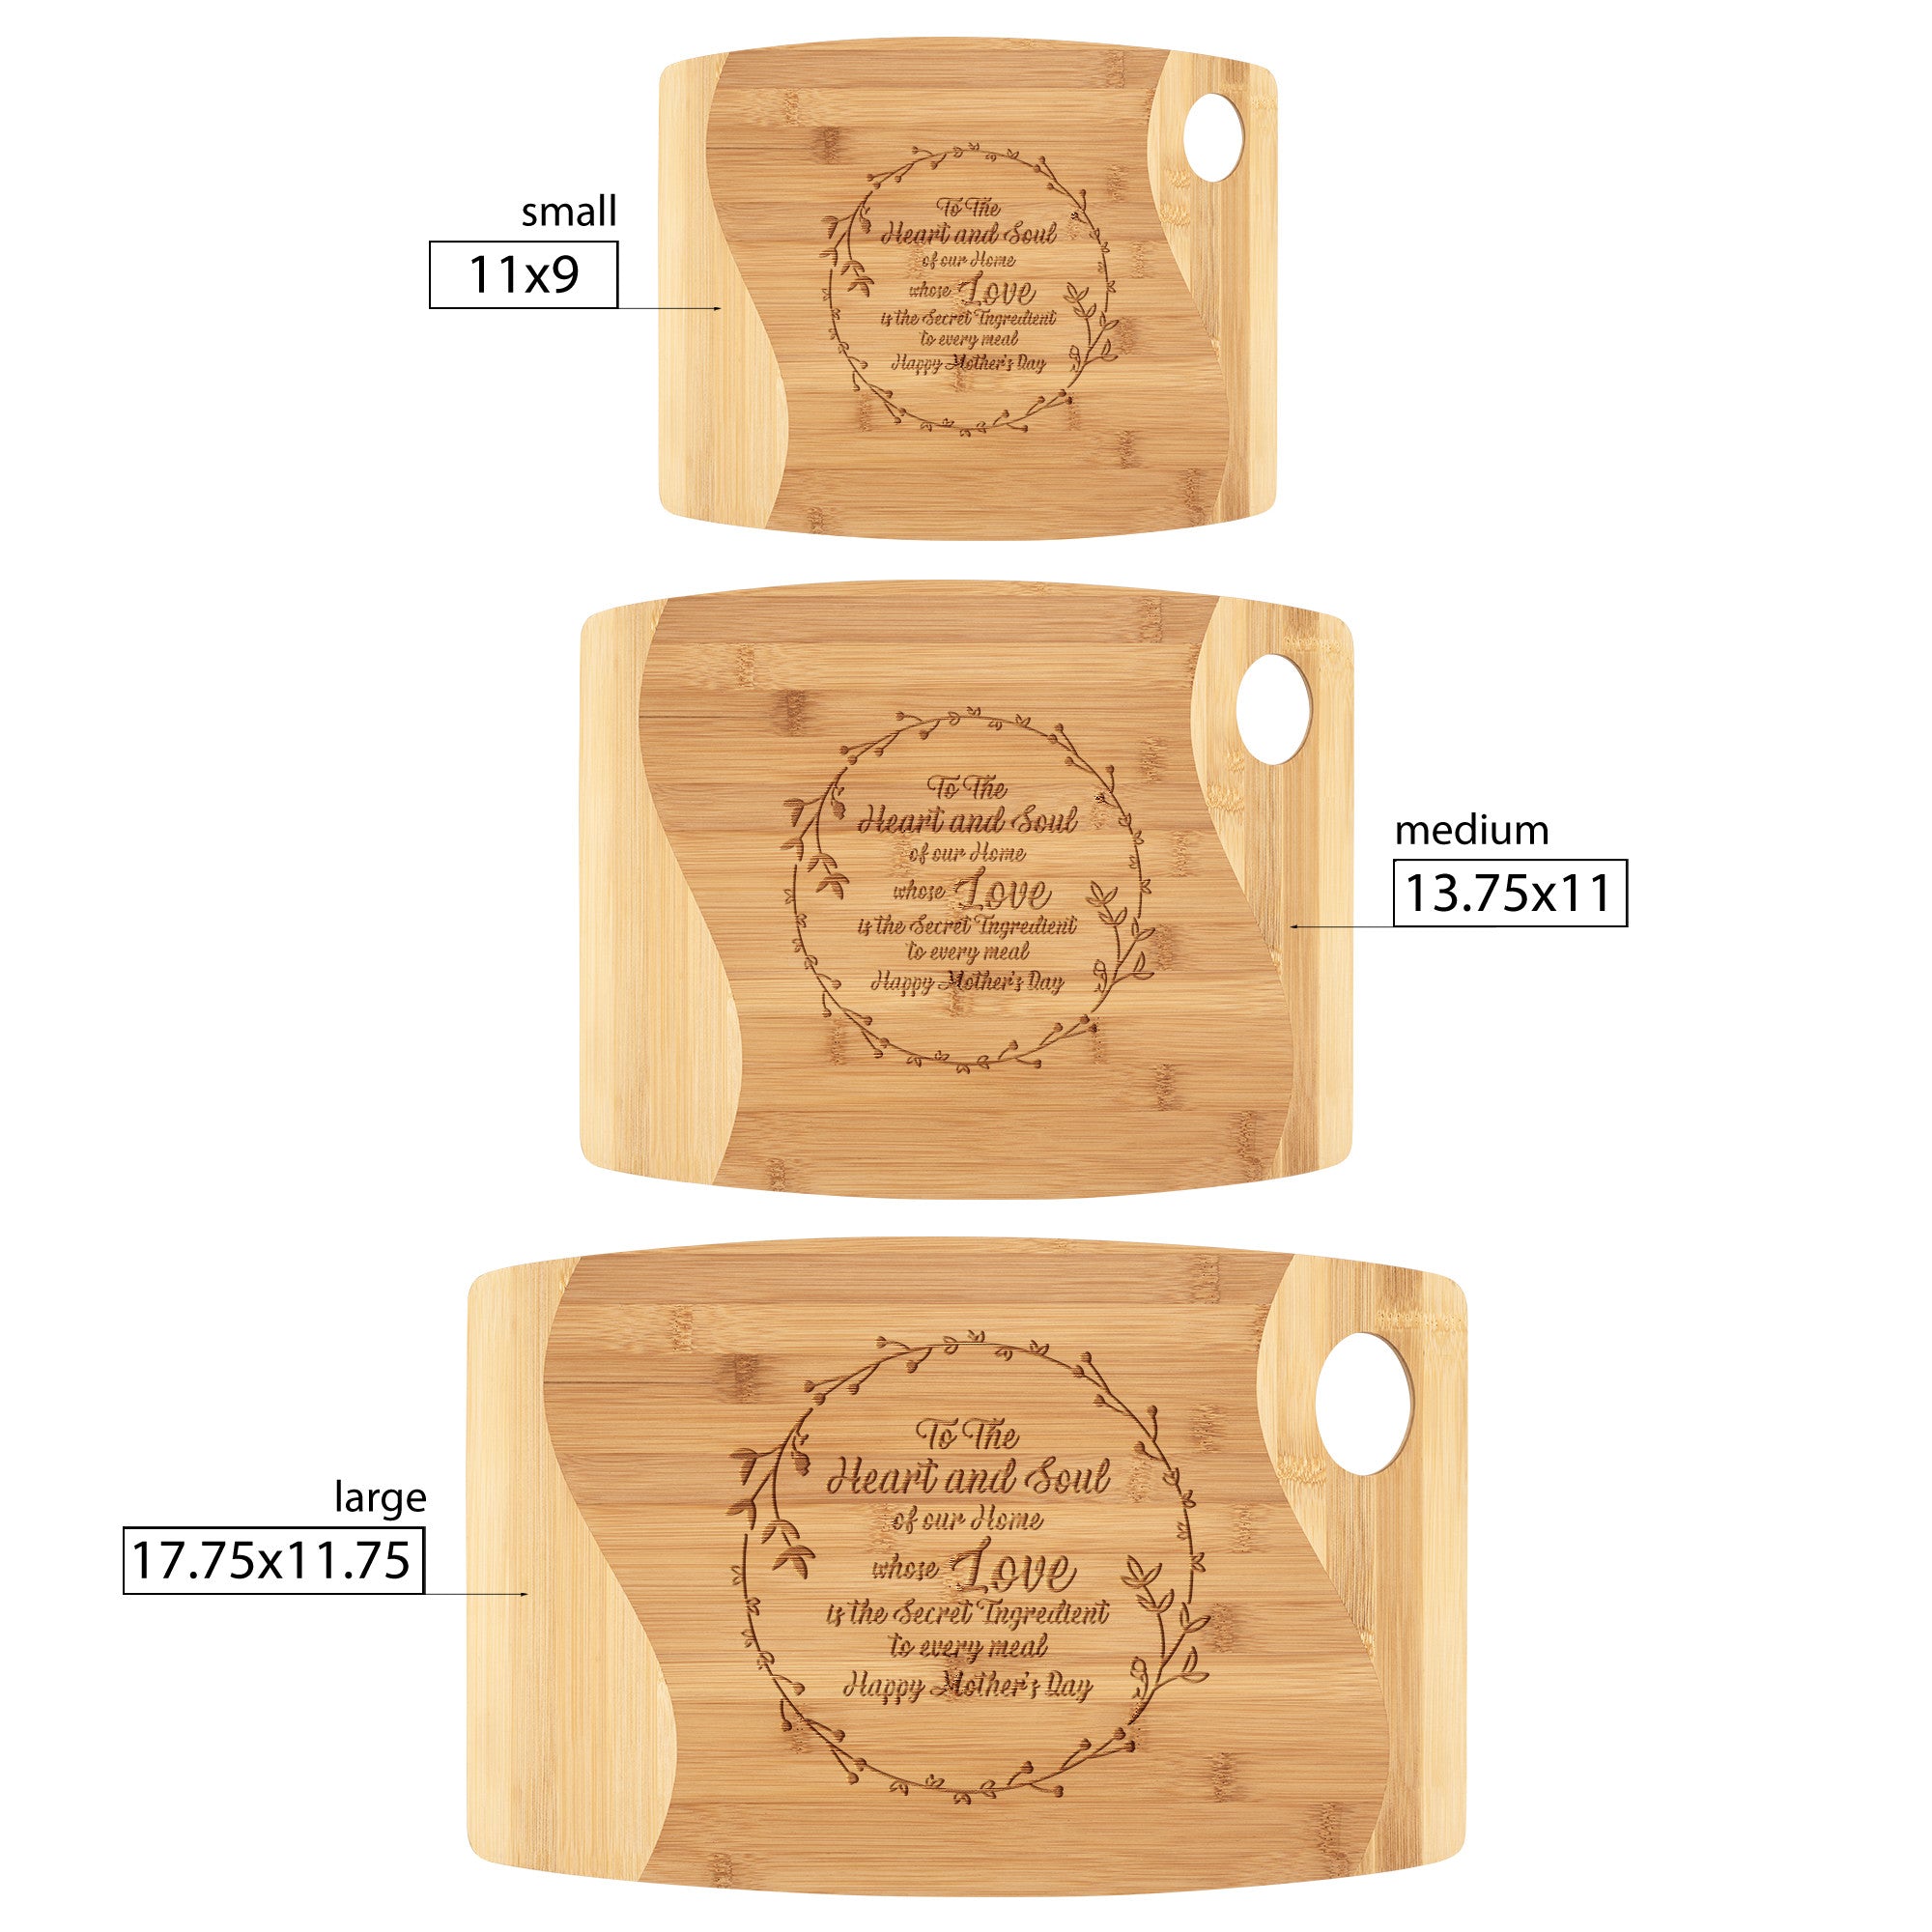 To The Heart and Soul - Cutting Board for Mother's Day